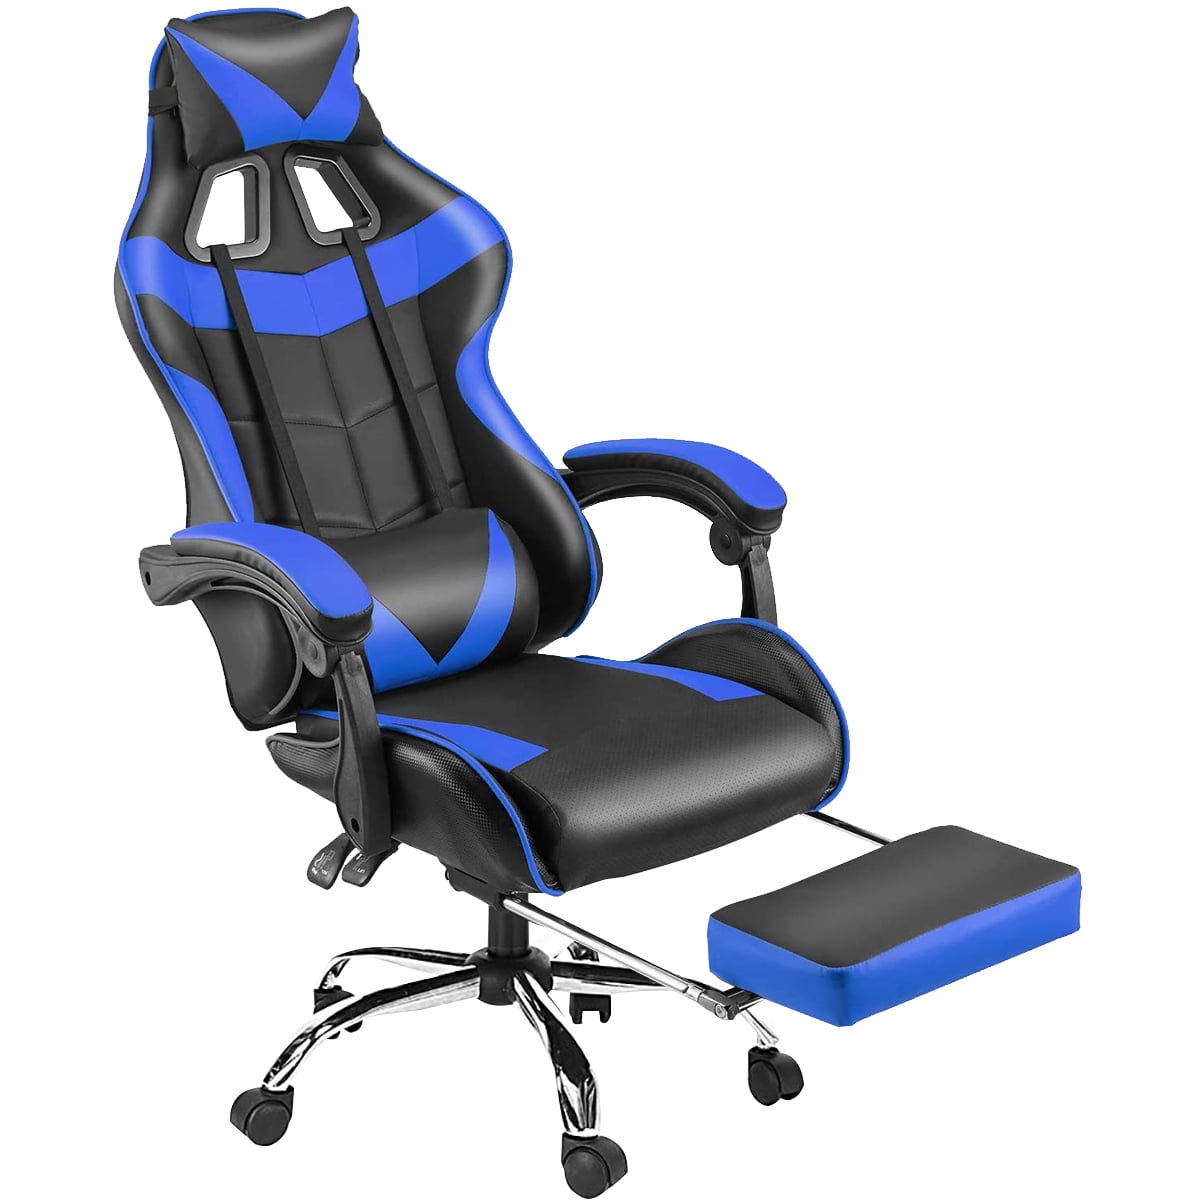 COOL Large BEST E-SPORTS GAMING CHAIR With MASSAGE Pillow For Kid Boy Teen Adult 